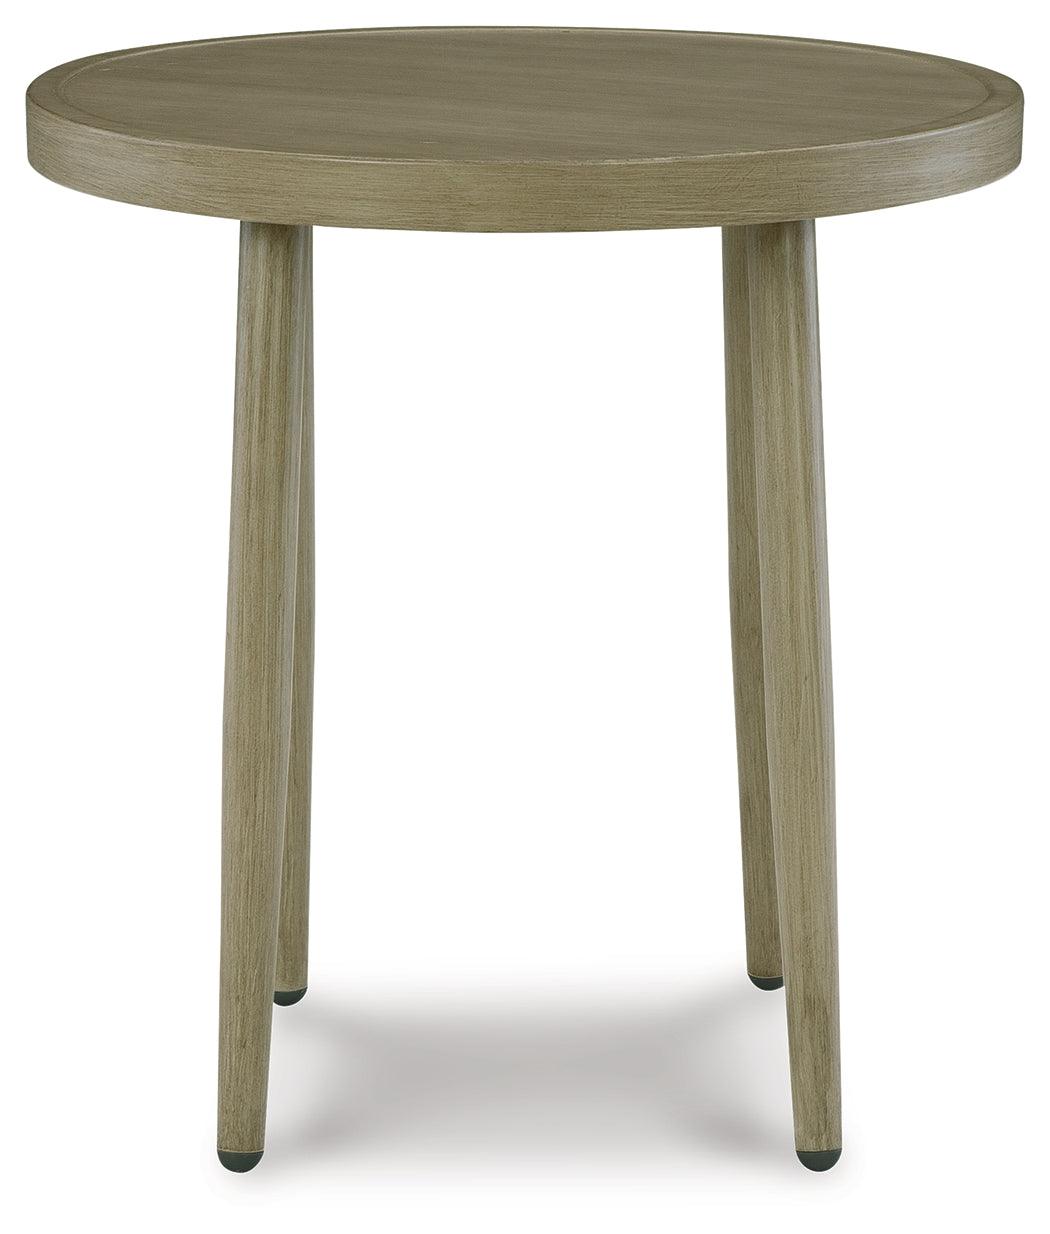 Swiss Beige Valley Outdoor Coffee Table With End Table - Ella Furniture